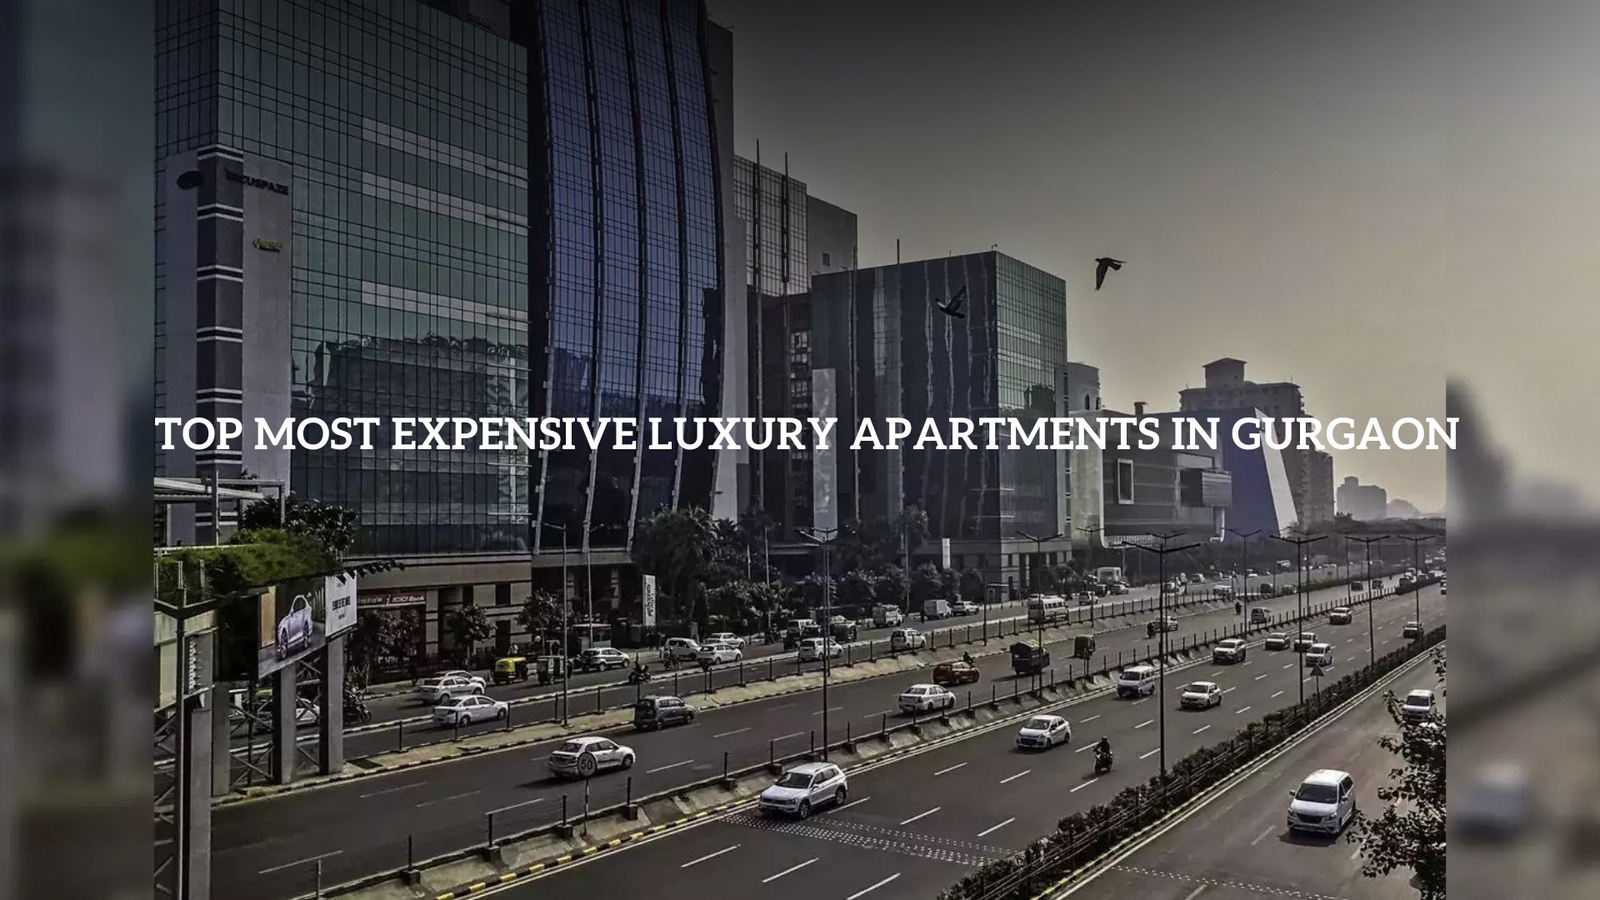 Top Most Expensive luxury apartments in Gurgaon